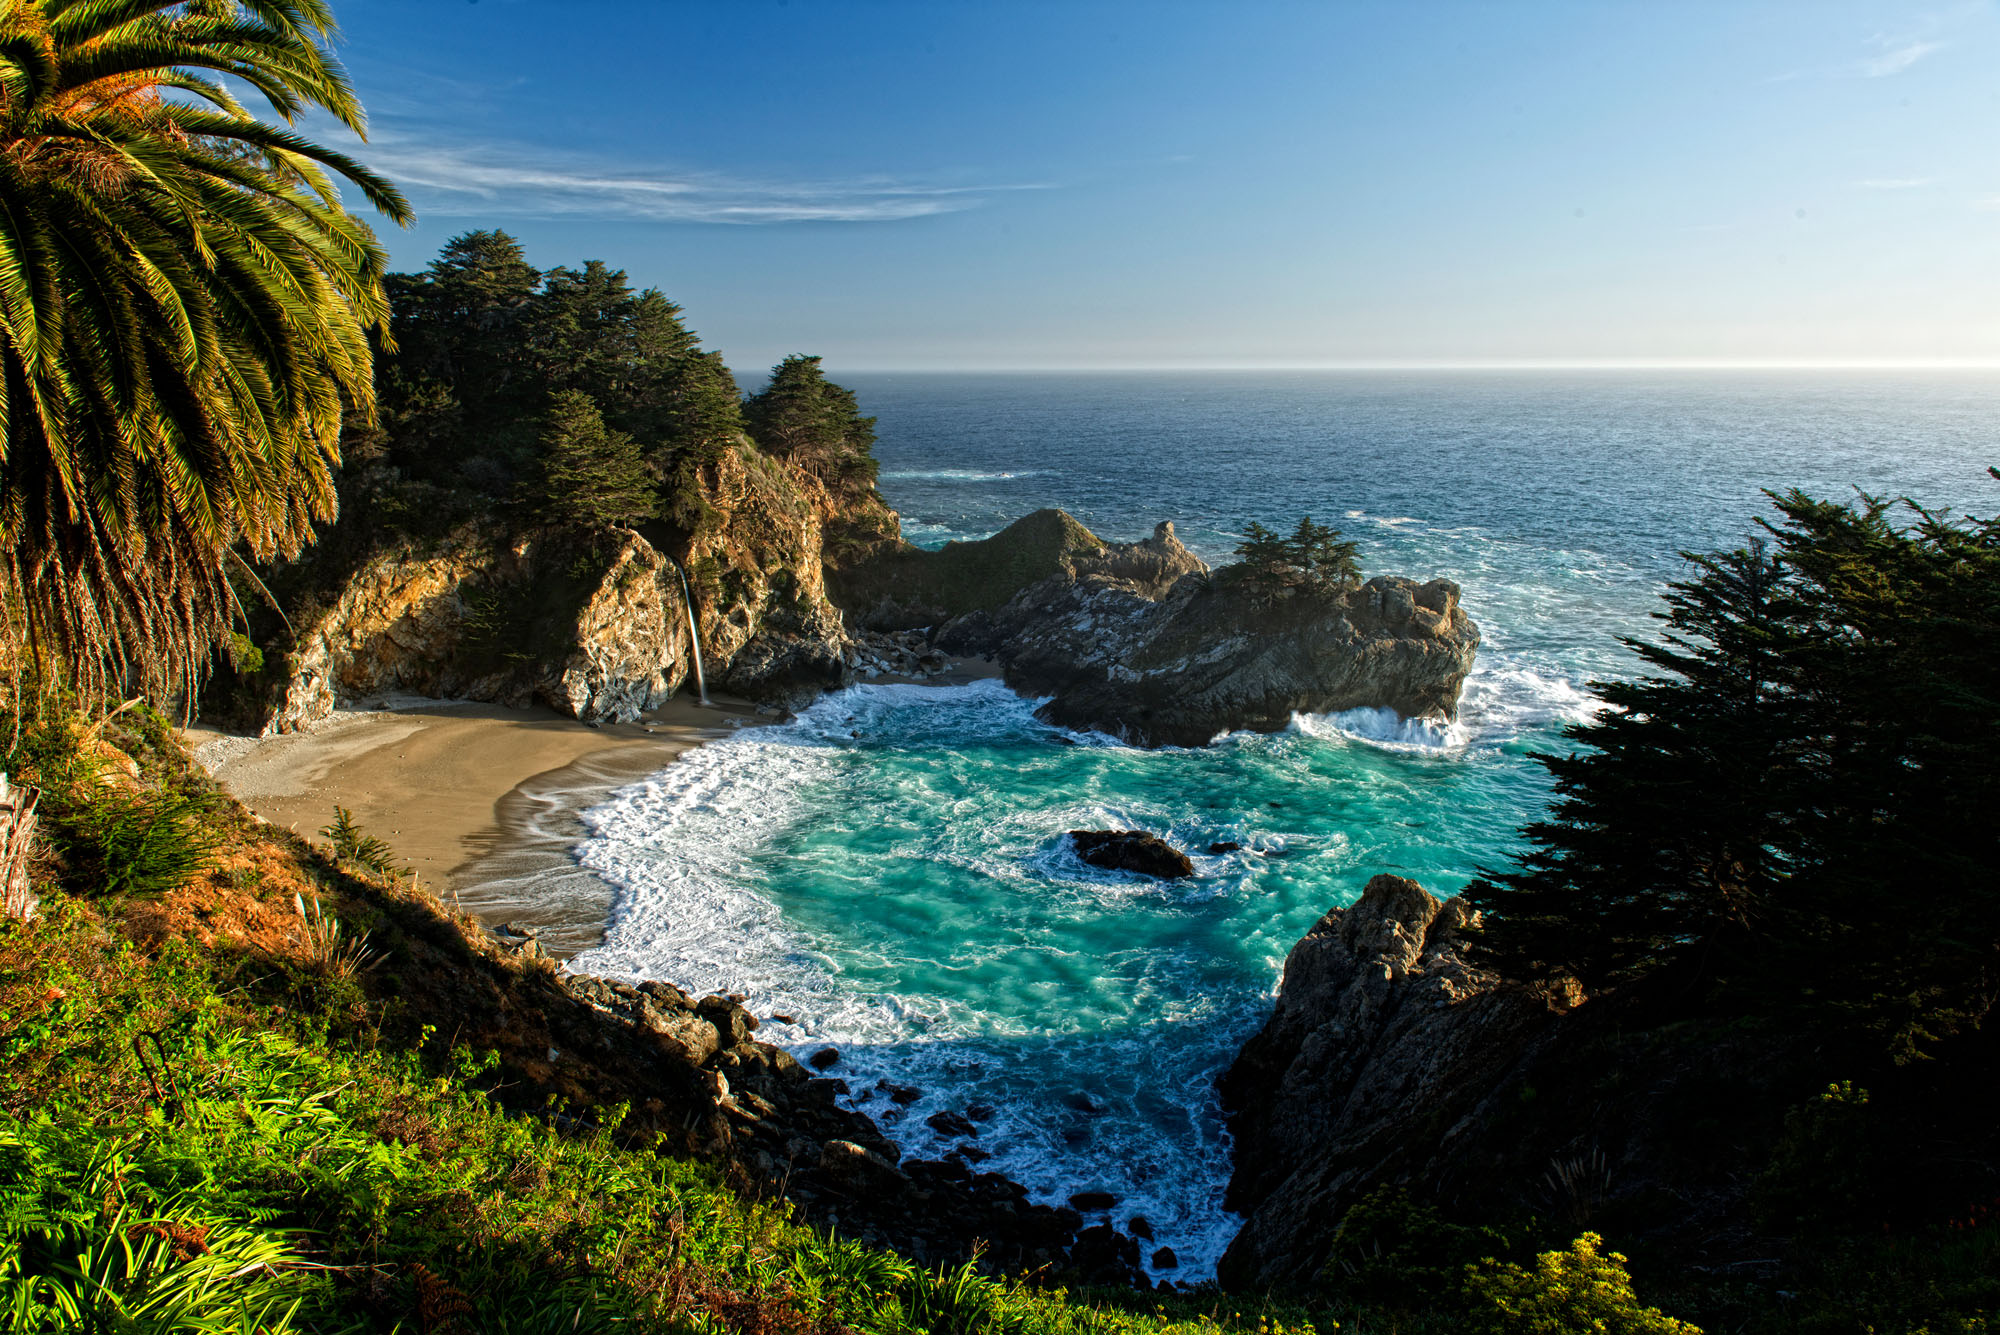 A narrow waterfall drops off of a cliff down to the sandy beach of a Pacific Ocean cove